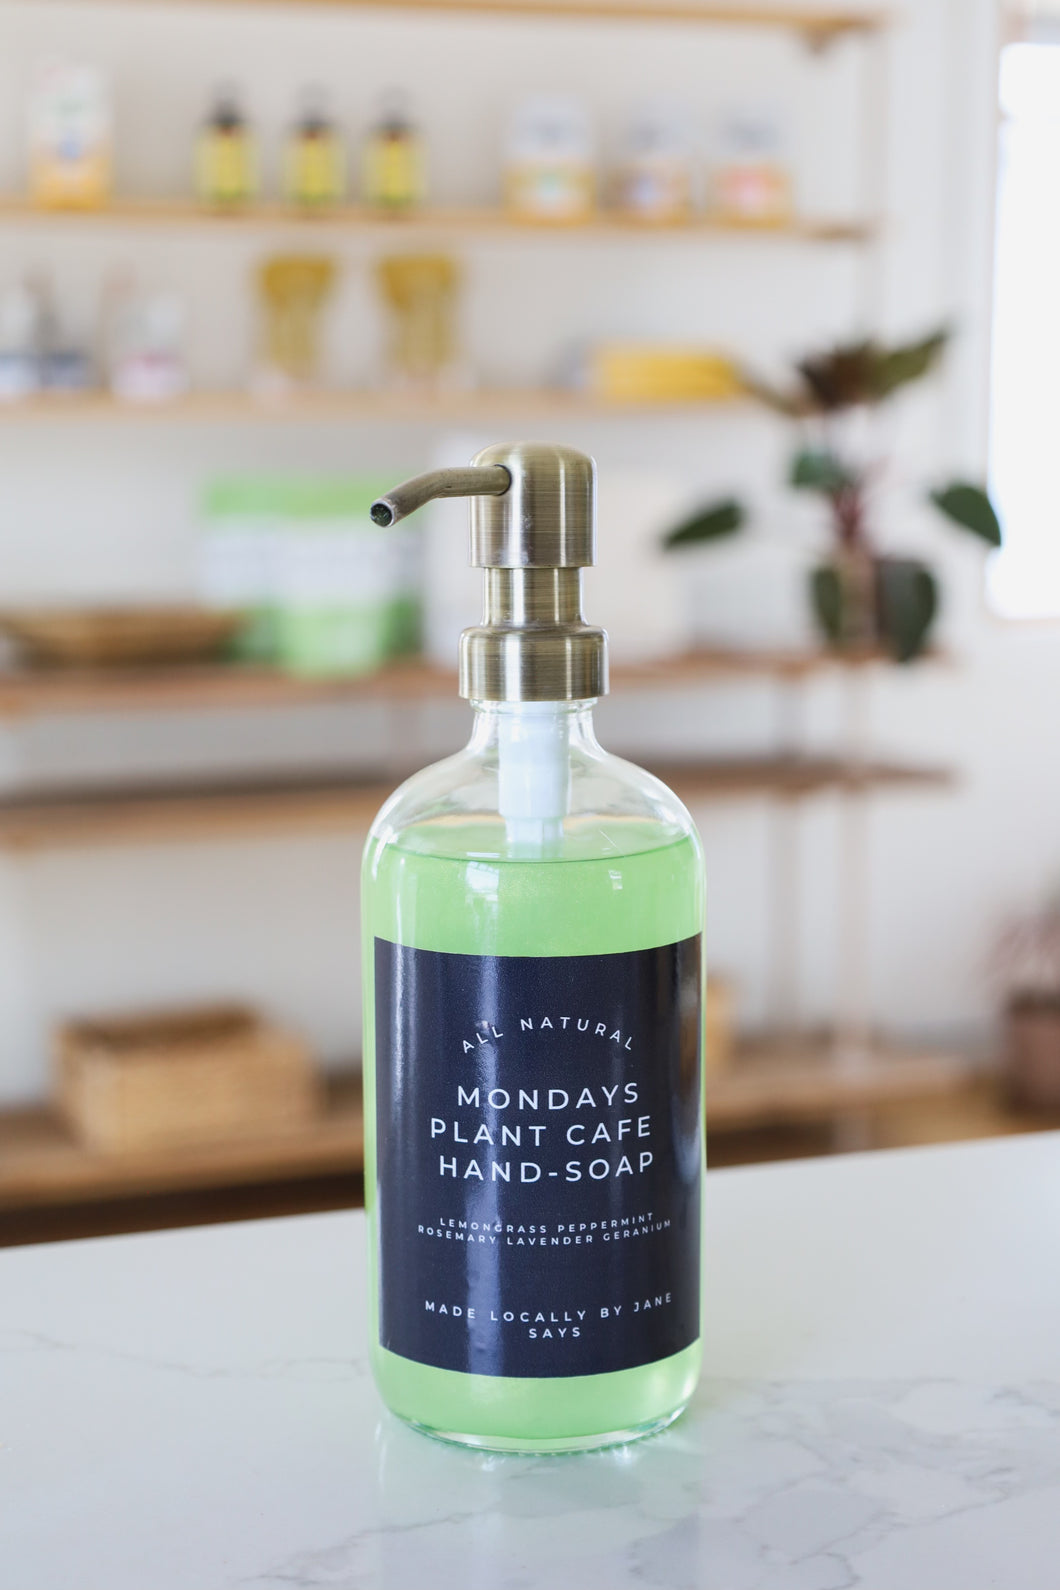 Monday's Plant Cafe/Jane Says Hand-Soap